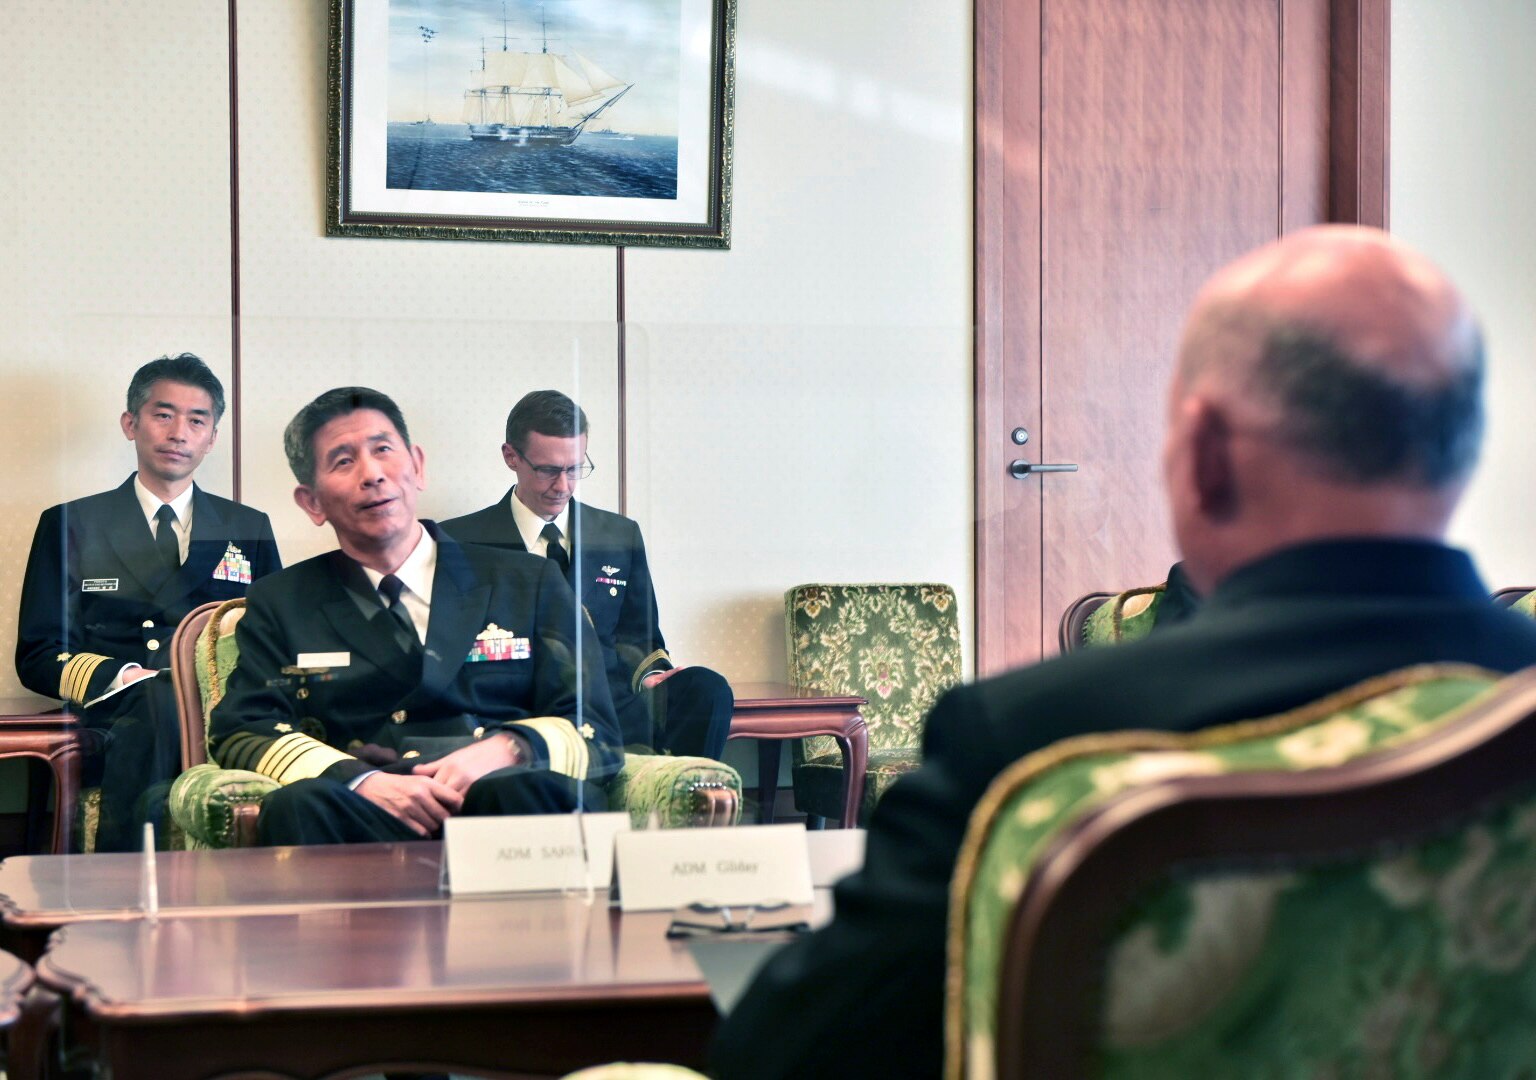 Readout of U.S. Chief of Naval Operations Adm. Mike Gilday Meeting with Chief of Staff of the JMSDF Adm. Sakai Ryo